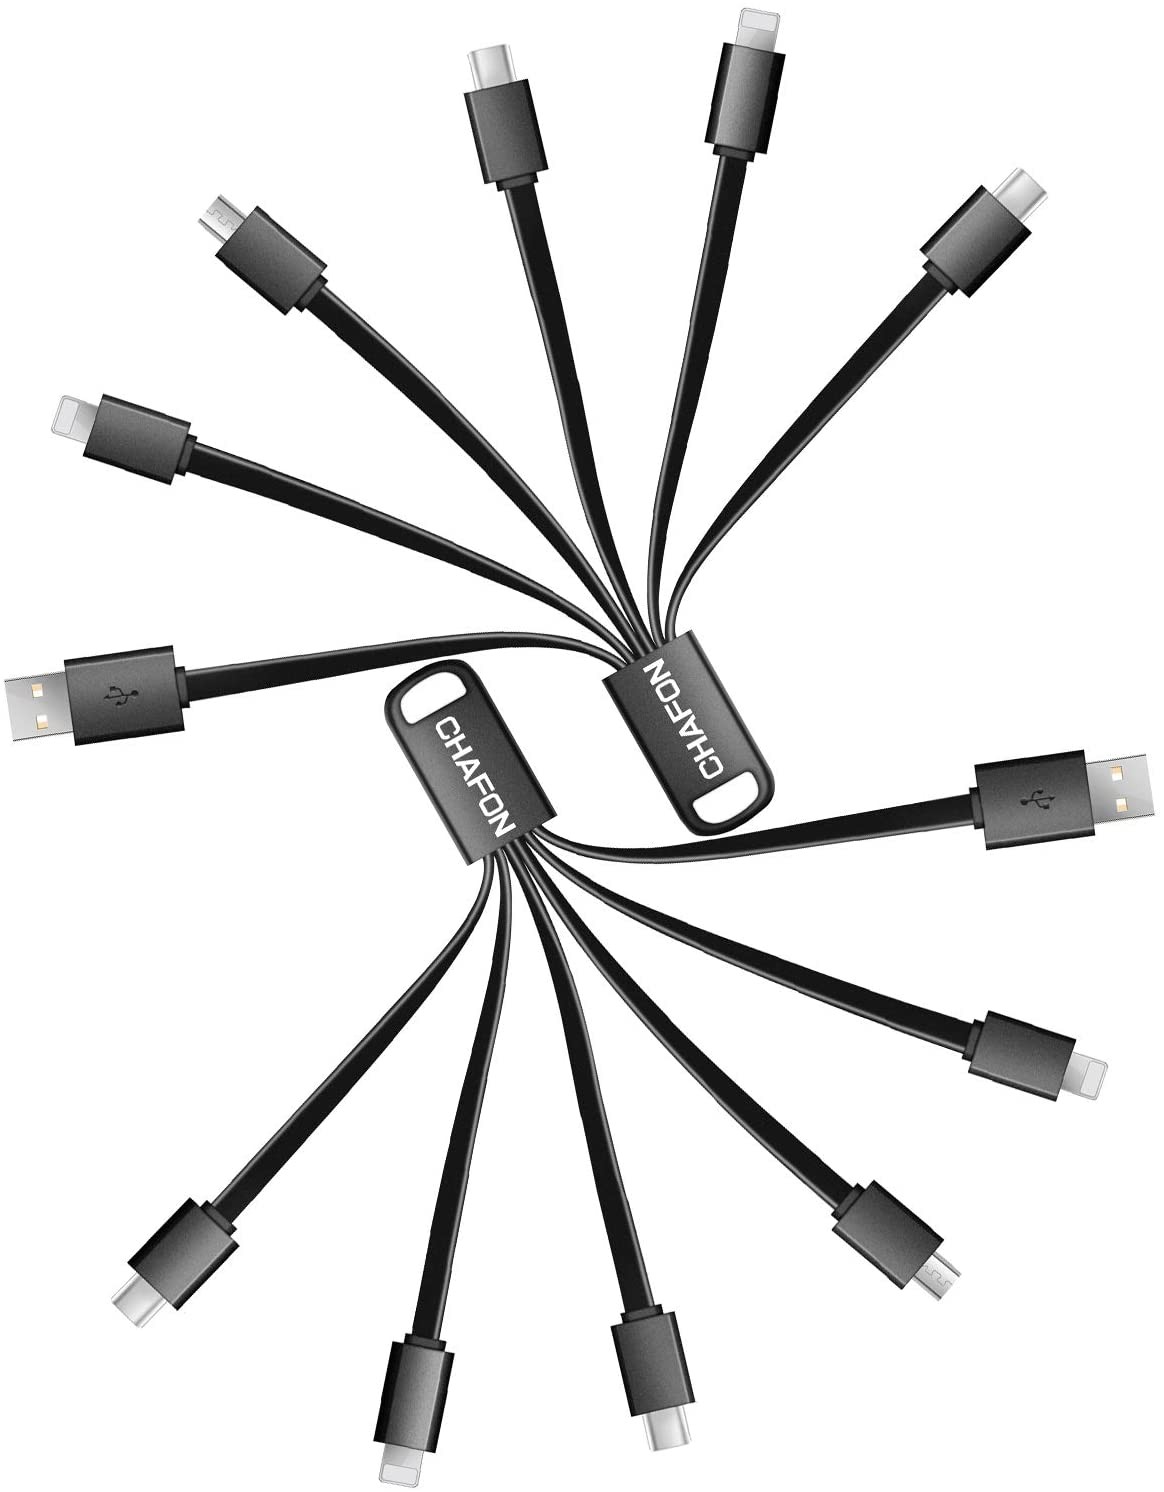 Multi Charging Cable Short 3A,6 in 1 USB Charge Cord with 2 USB C,2 Phone,Micro Connectors Replaceme